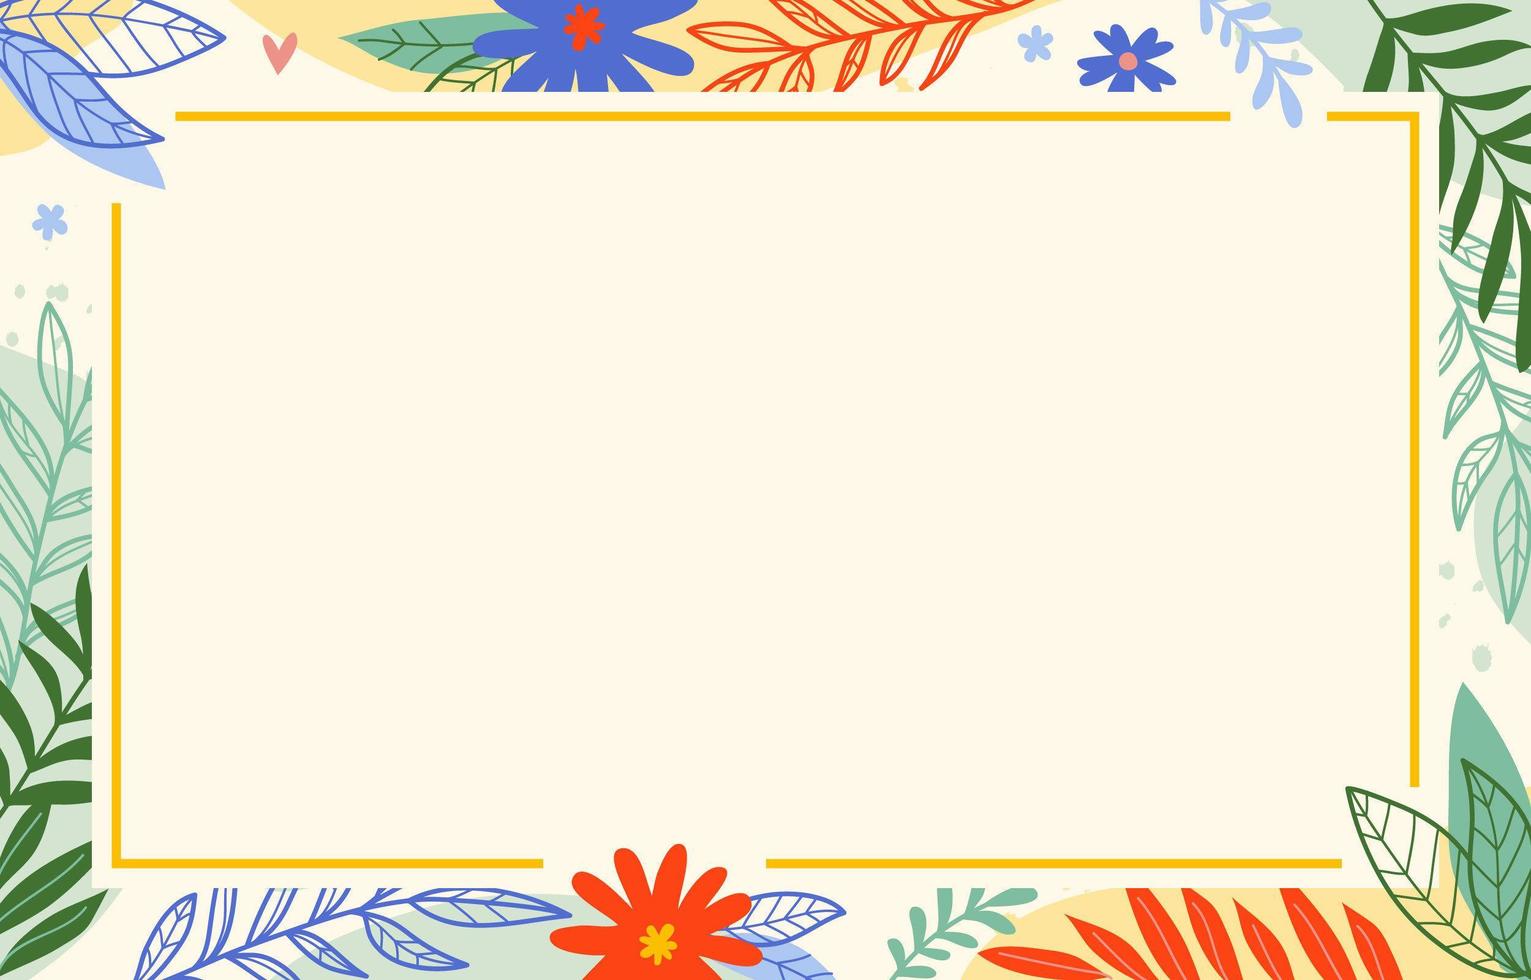 Background with Floral Elements Border vector